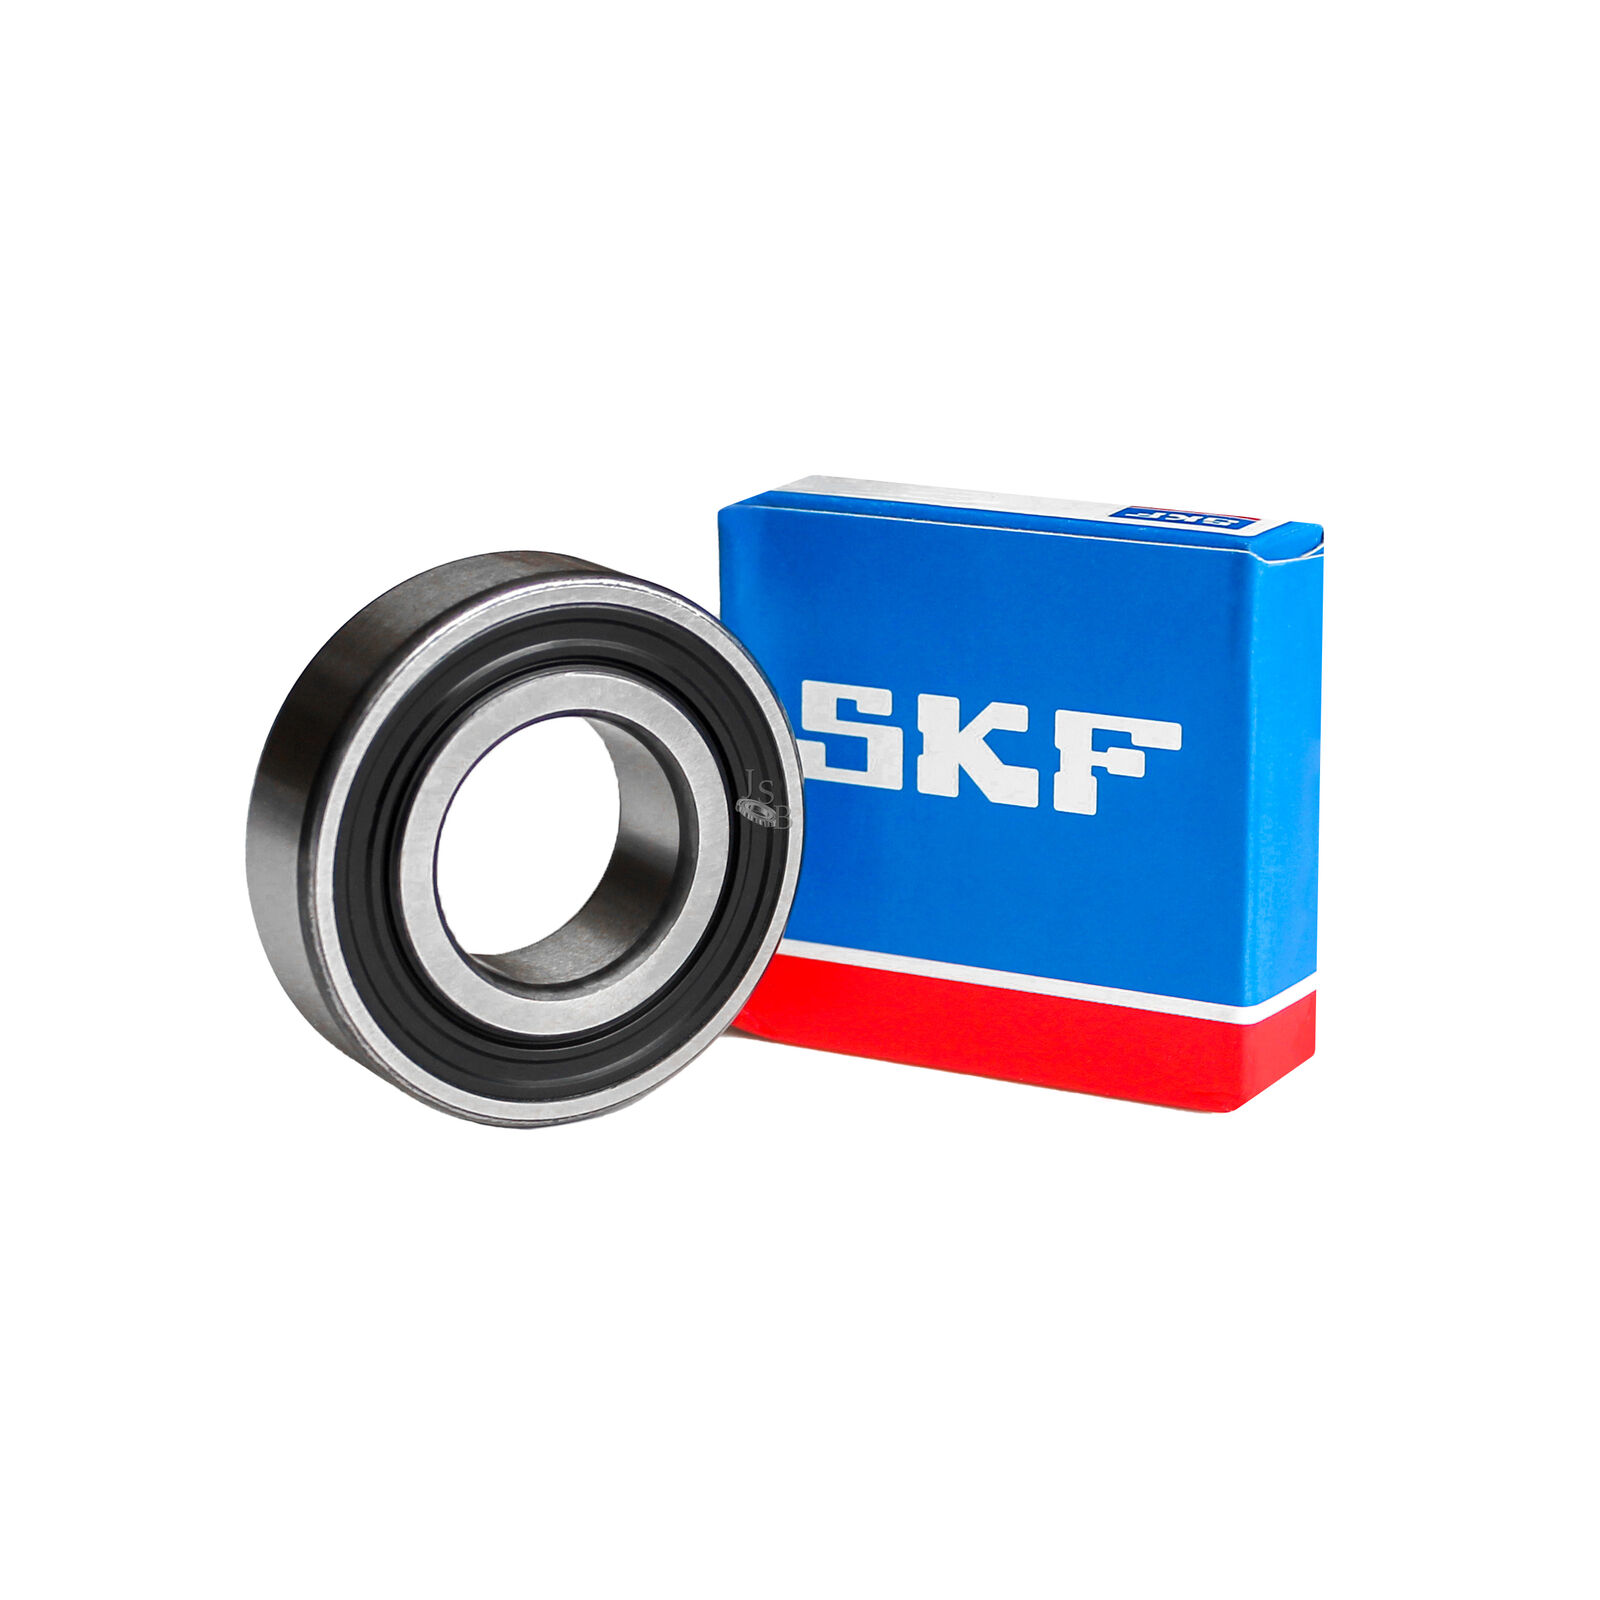 6004-2RS SKF Brand Rubber Seal Ball Bearing 20x42x12 6004 2RS 6004RS